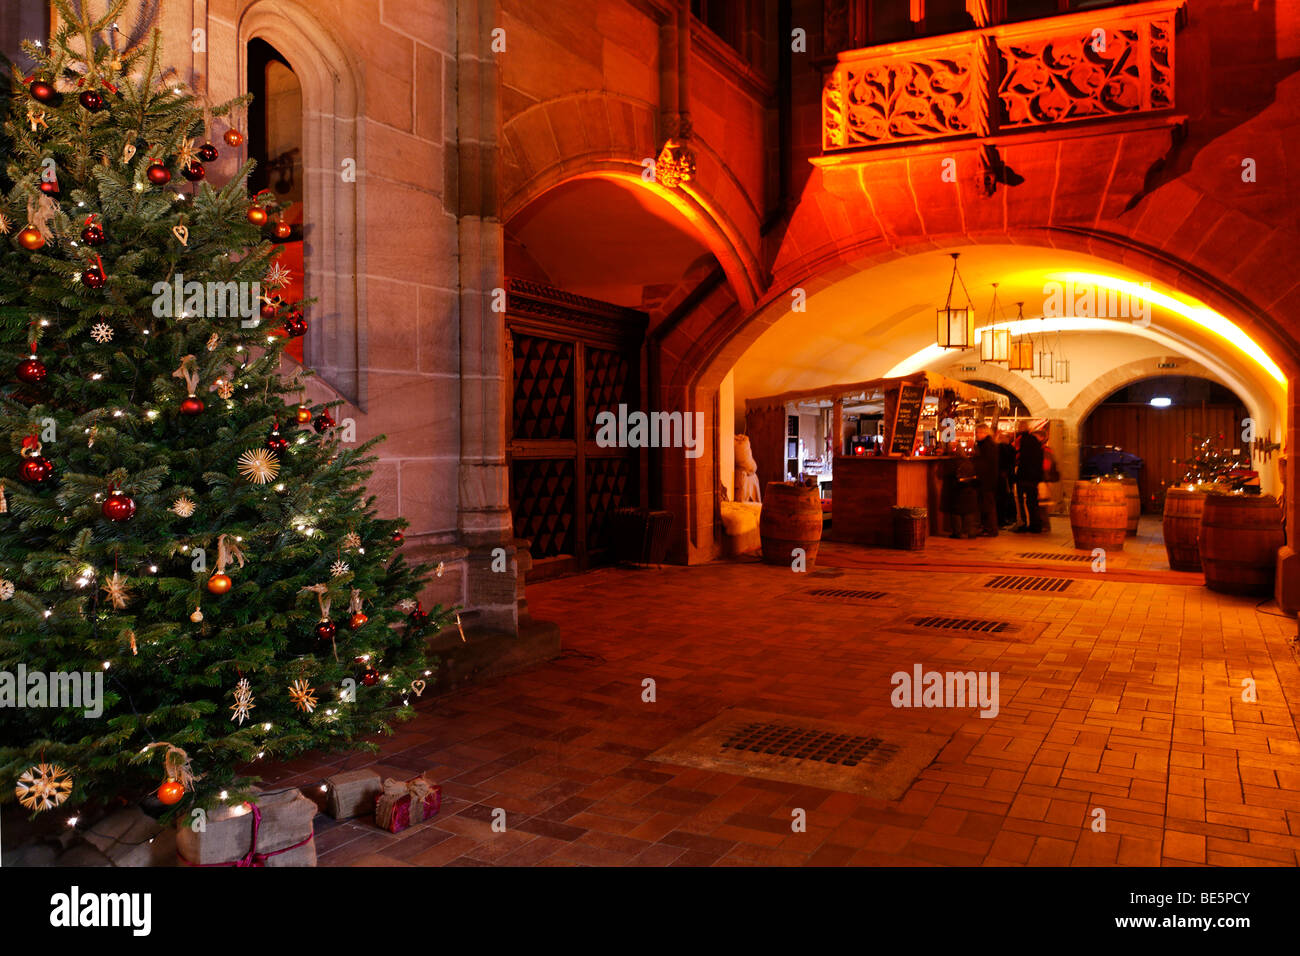 Christkindlesmarkt, Christmas market, in the arch of the city hall, Christmas tree, Wolfscher Bau building, historic city, Nure Stock Photo